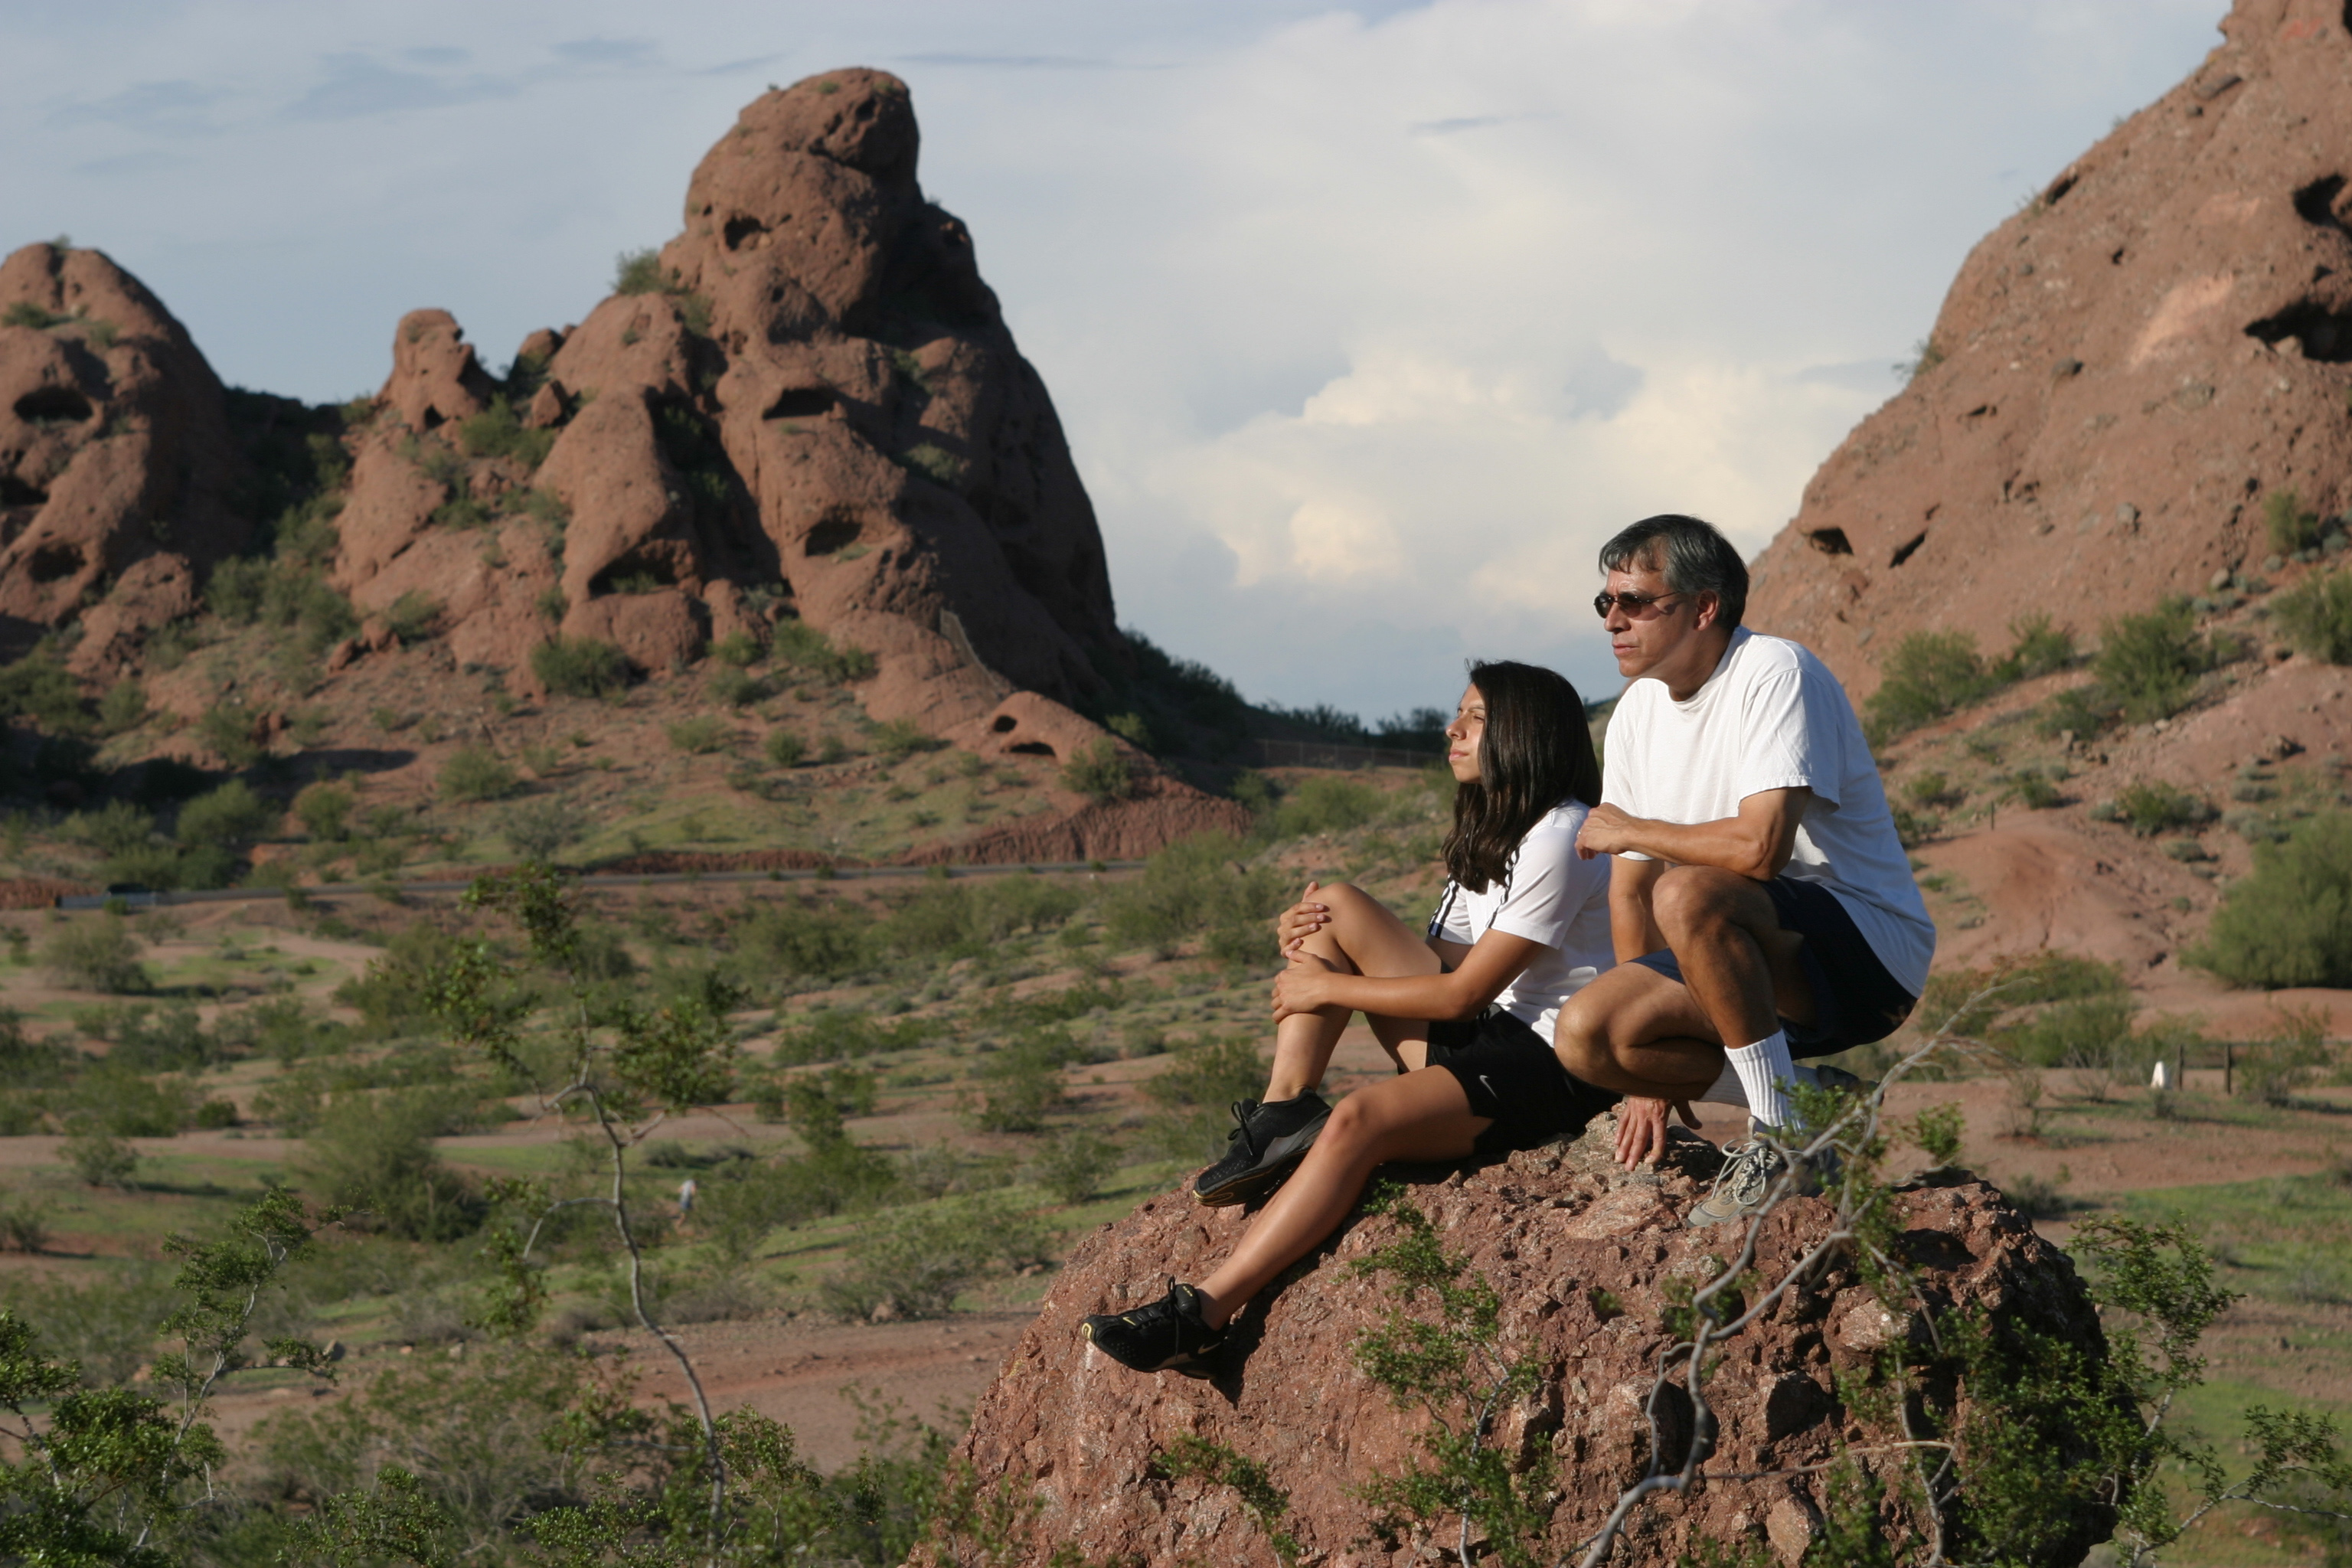 Affordable Outdoor Fun - Phoenix Parks and Recreation Offers Scores of Amenities